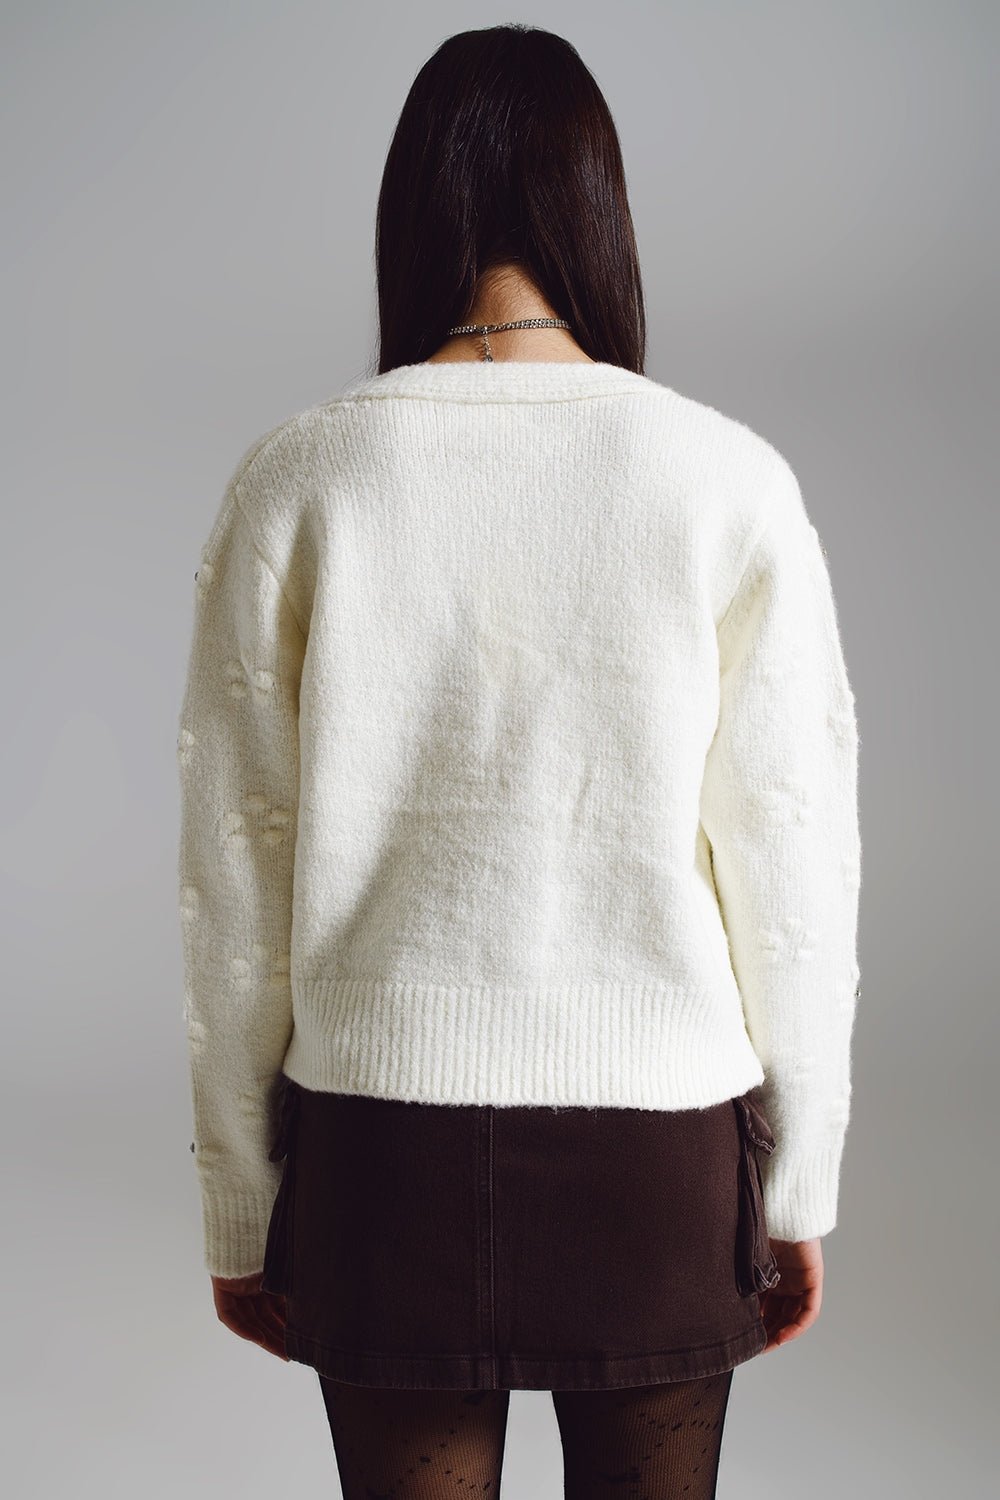 Cream Cardigan With Knitted Flowers and Embellished Details - Mack & Harvie